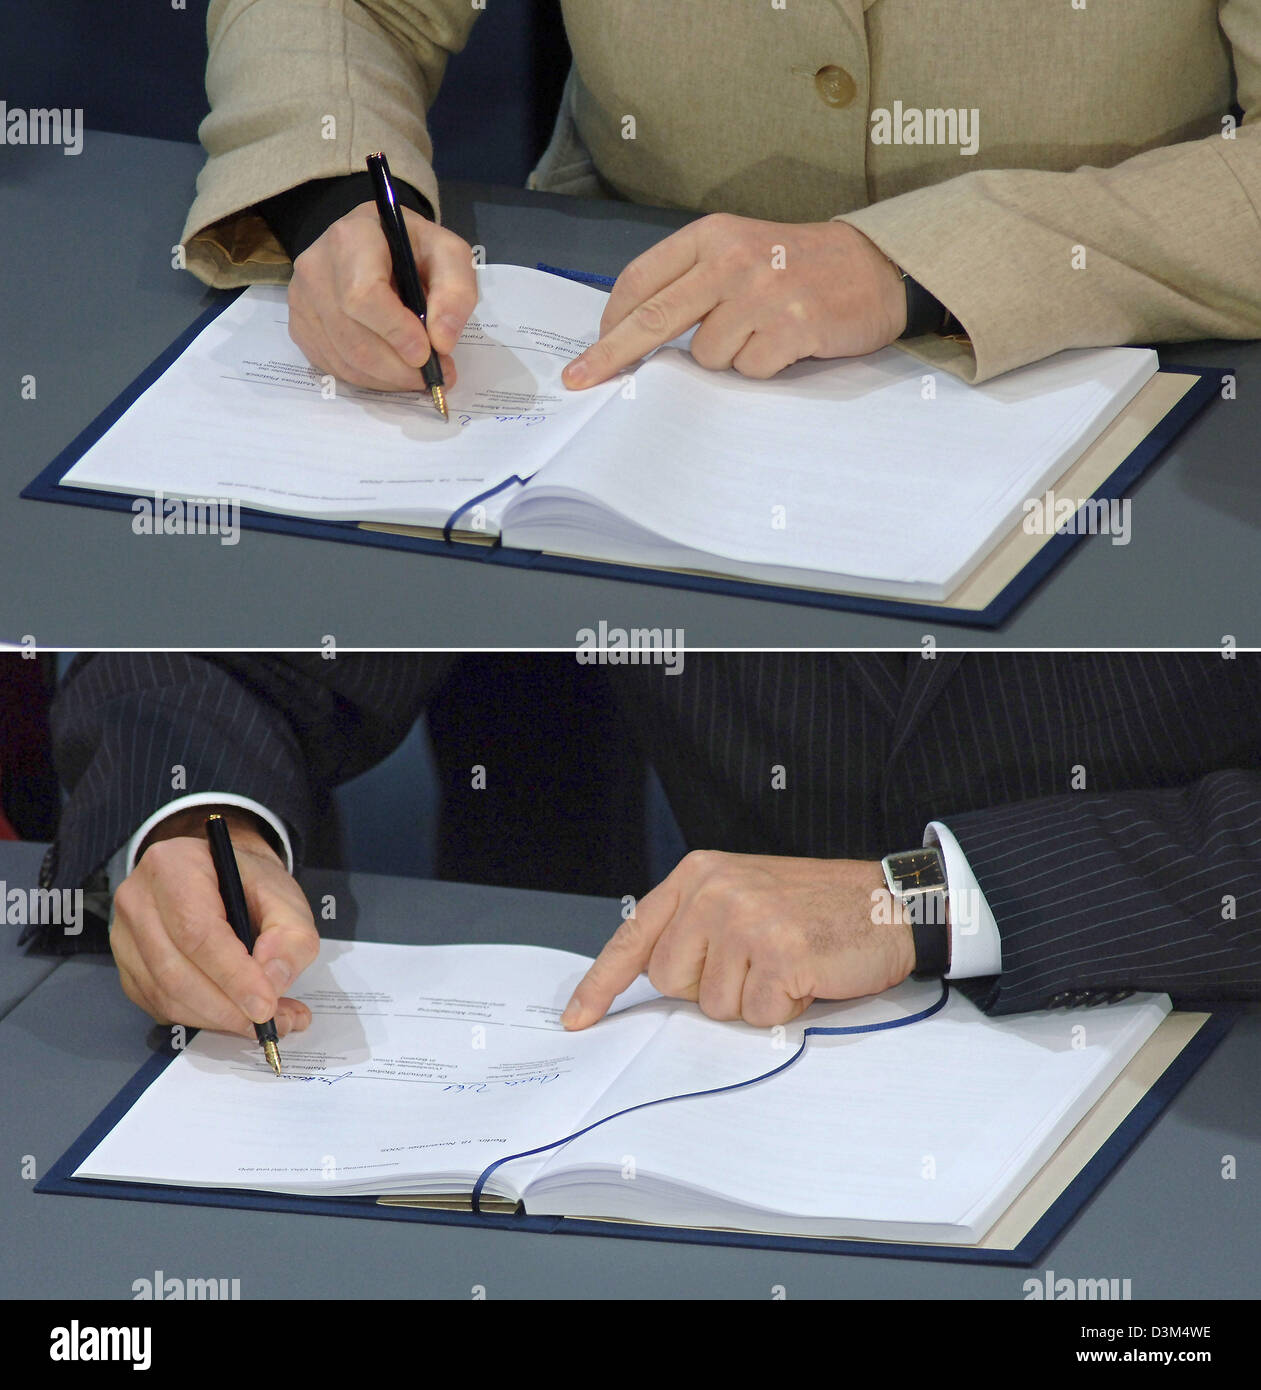 (dpa) - The composite picture shows the hands of CDU's Angela Merkel (top), Chairwomen of the conservative Christian Democrats (CDU) and Matthias Platzeck, Chairman of the Social Democrats (SPD), signing the  coalition agreement for a grand government coalition between the CDU and SPD in Berlin, Friday 18 November 2005. Merkel is expected to be elected as Germany's first female cha Stock Photo